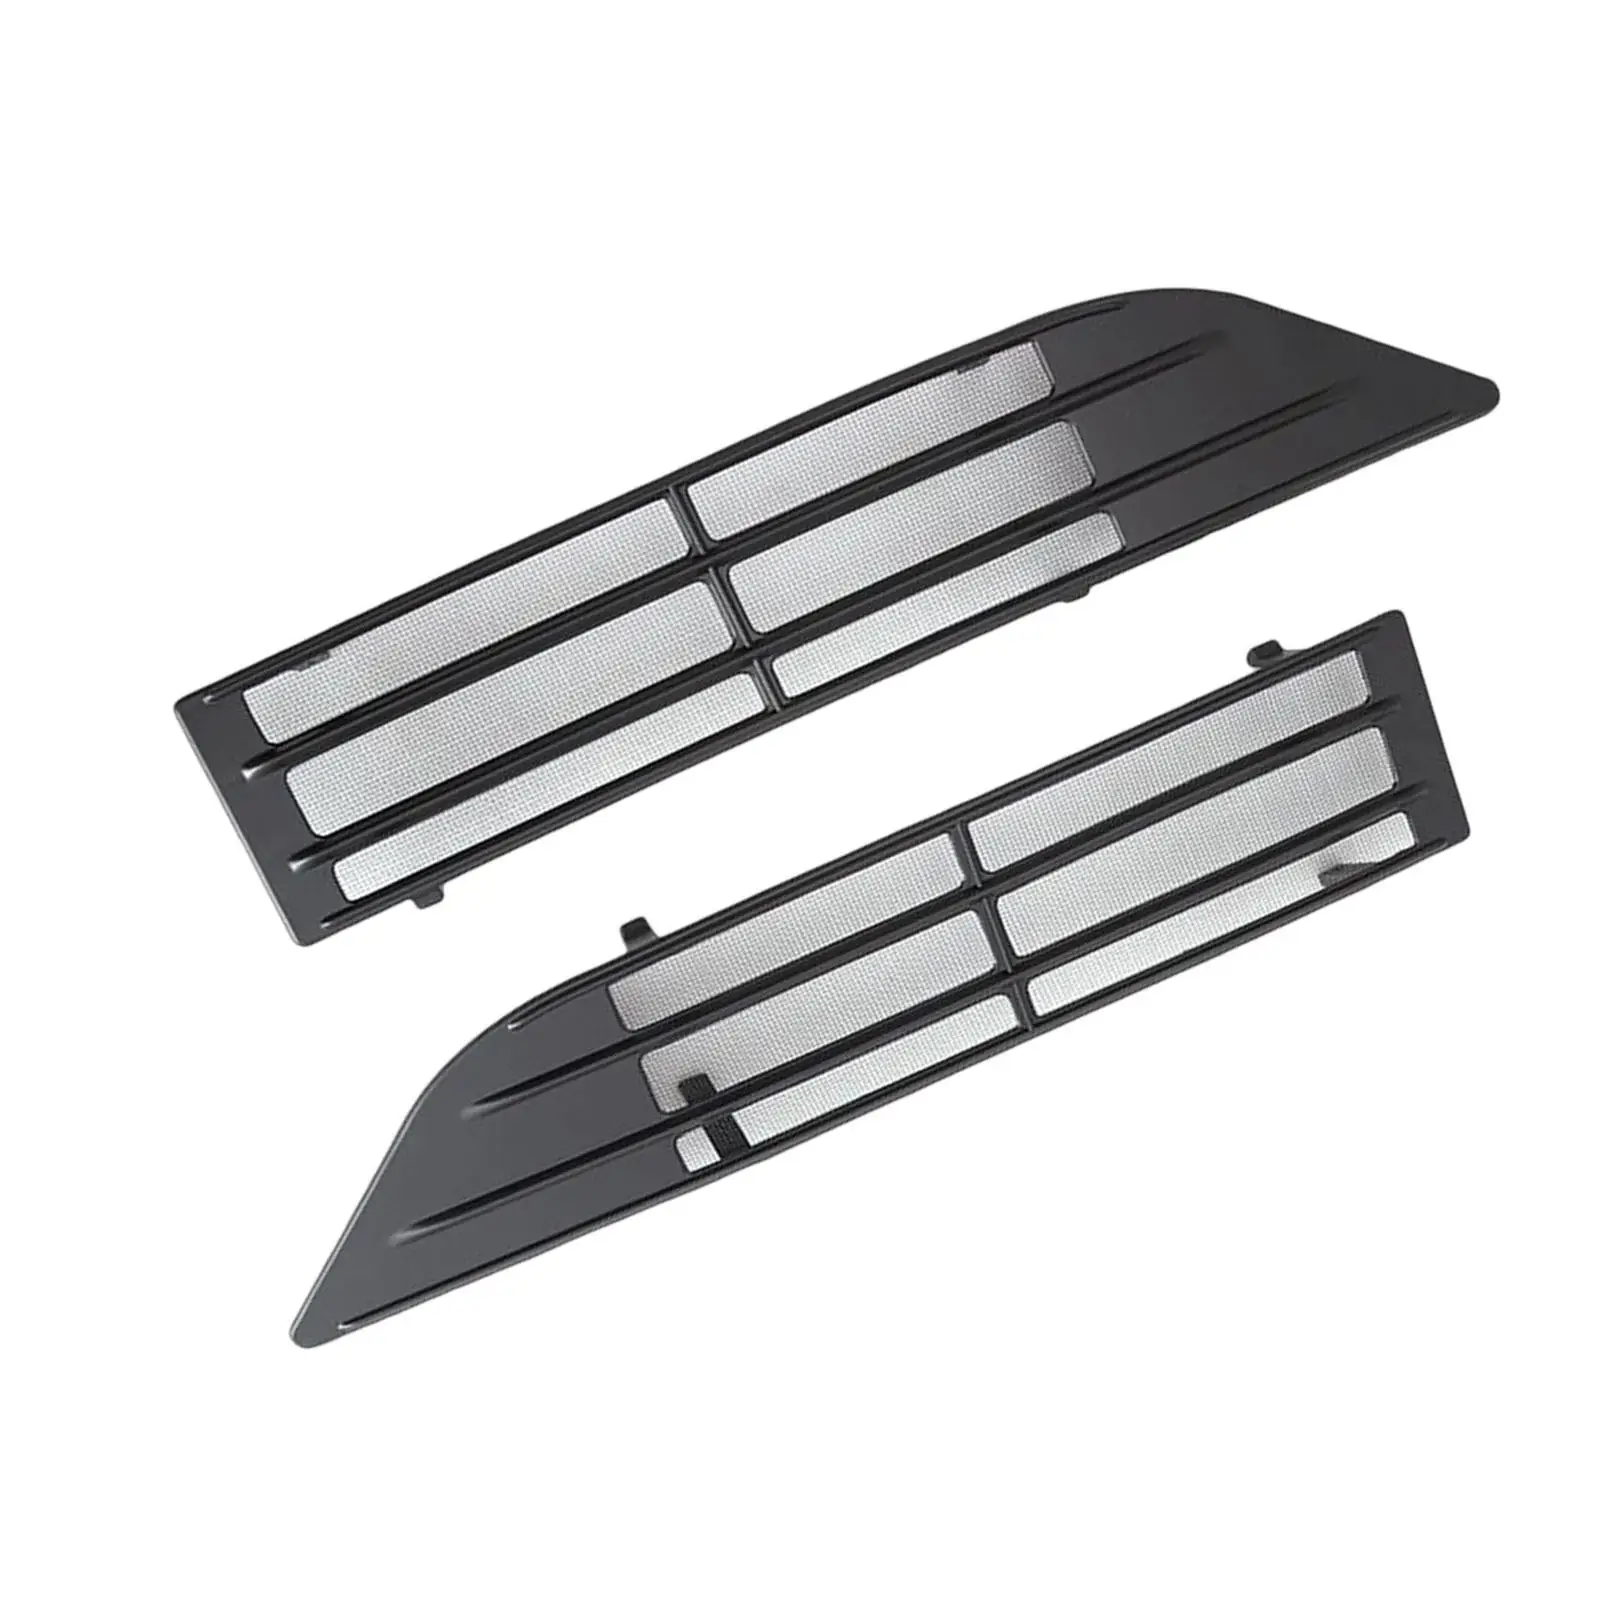 2x Front Grille Mesh Spare Parts Replacement Durable for Byd Yuan